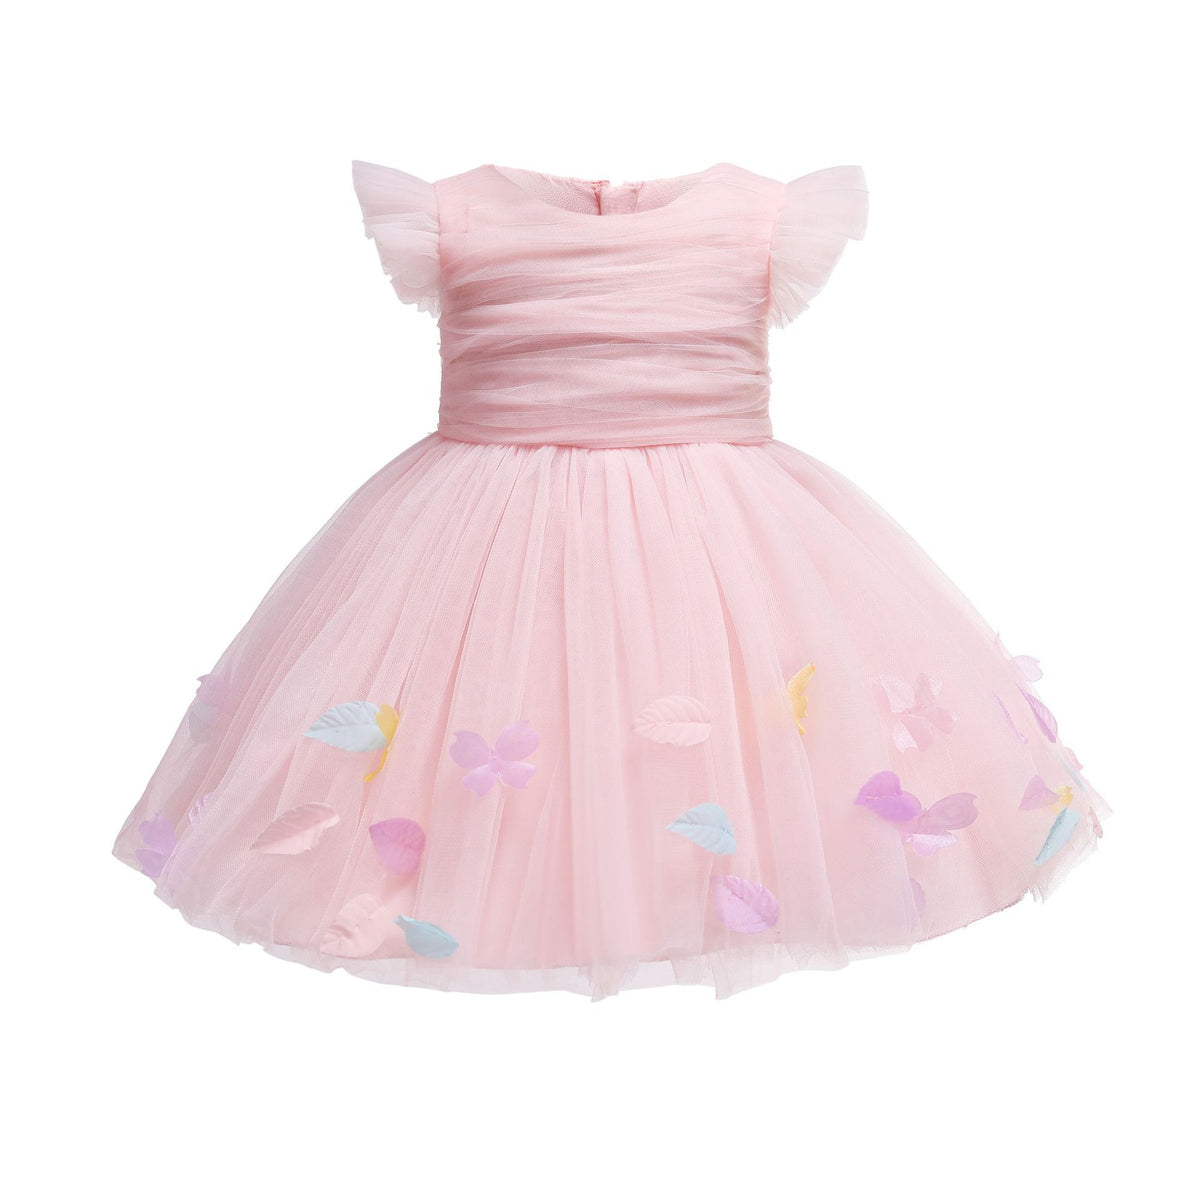 Baby's A Line Tulle Gown with Bow Cute Flower Girl Dresses Princess